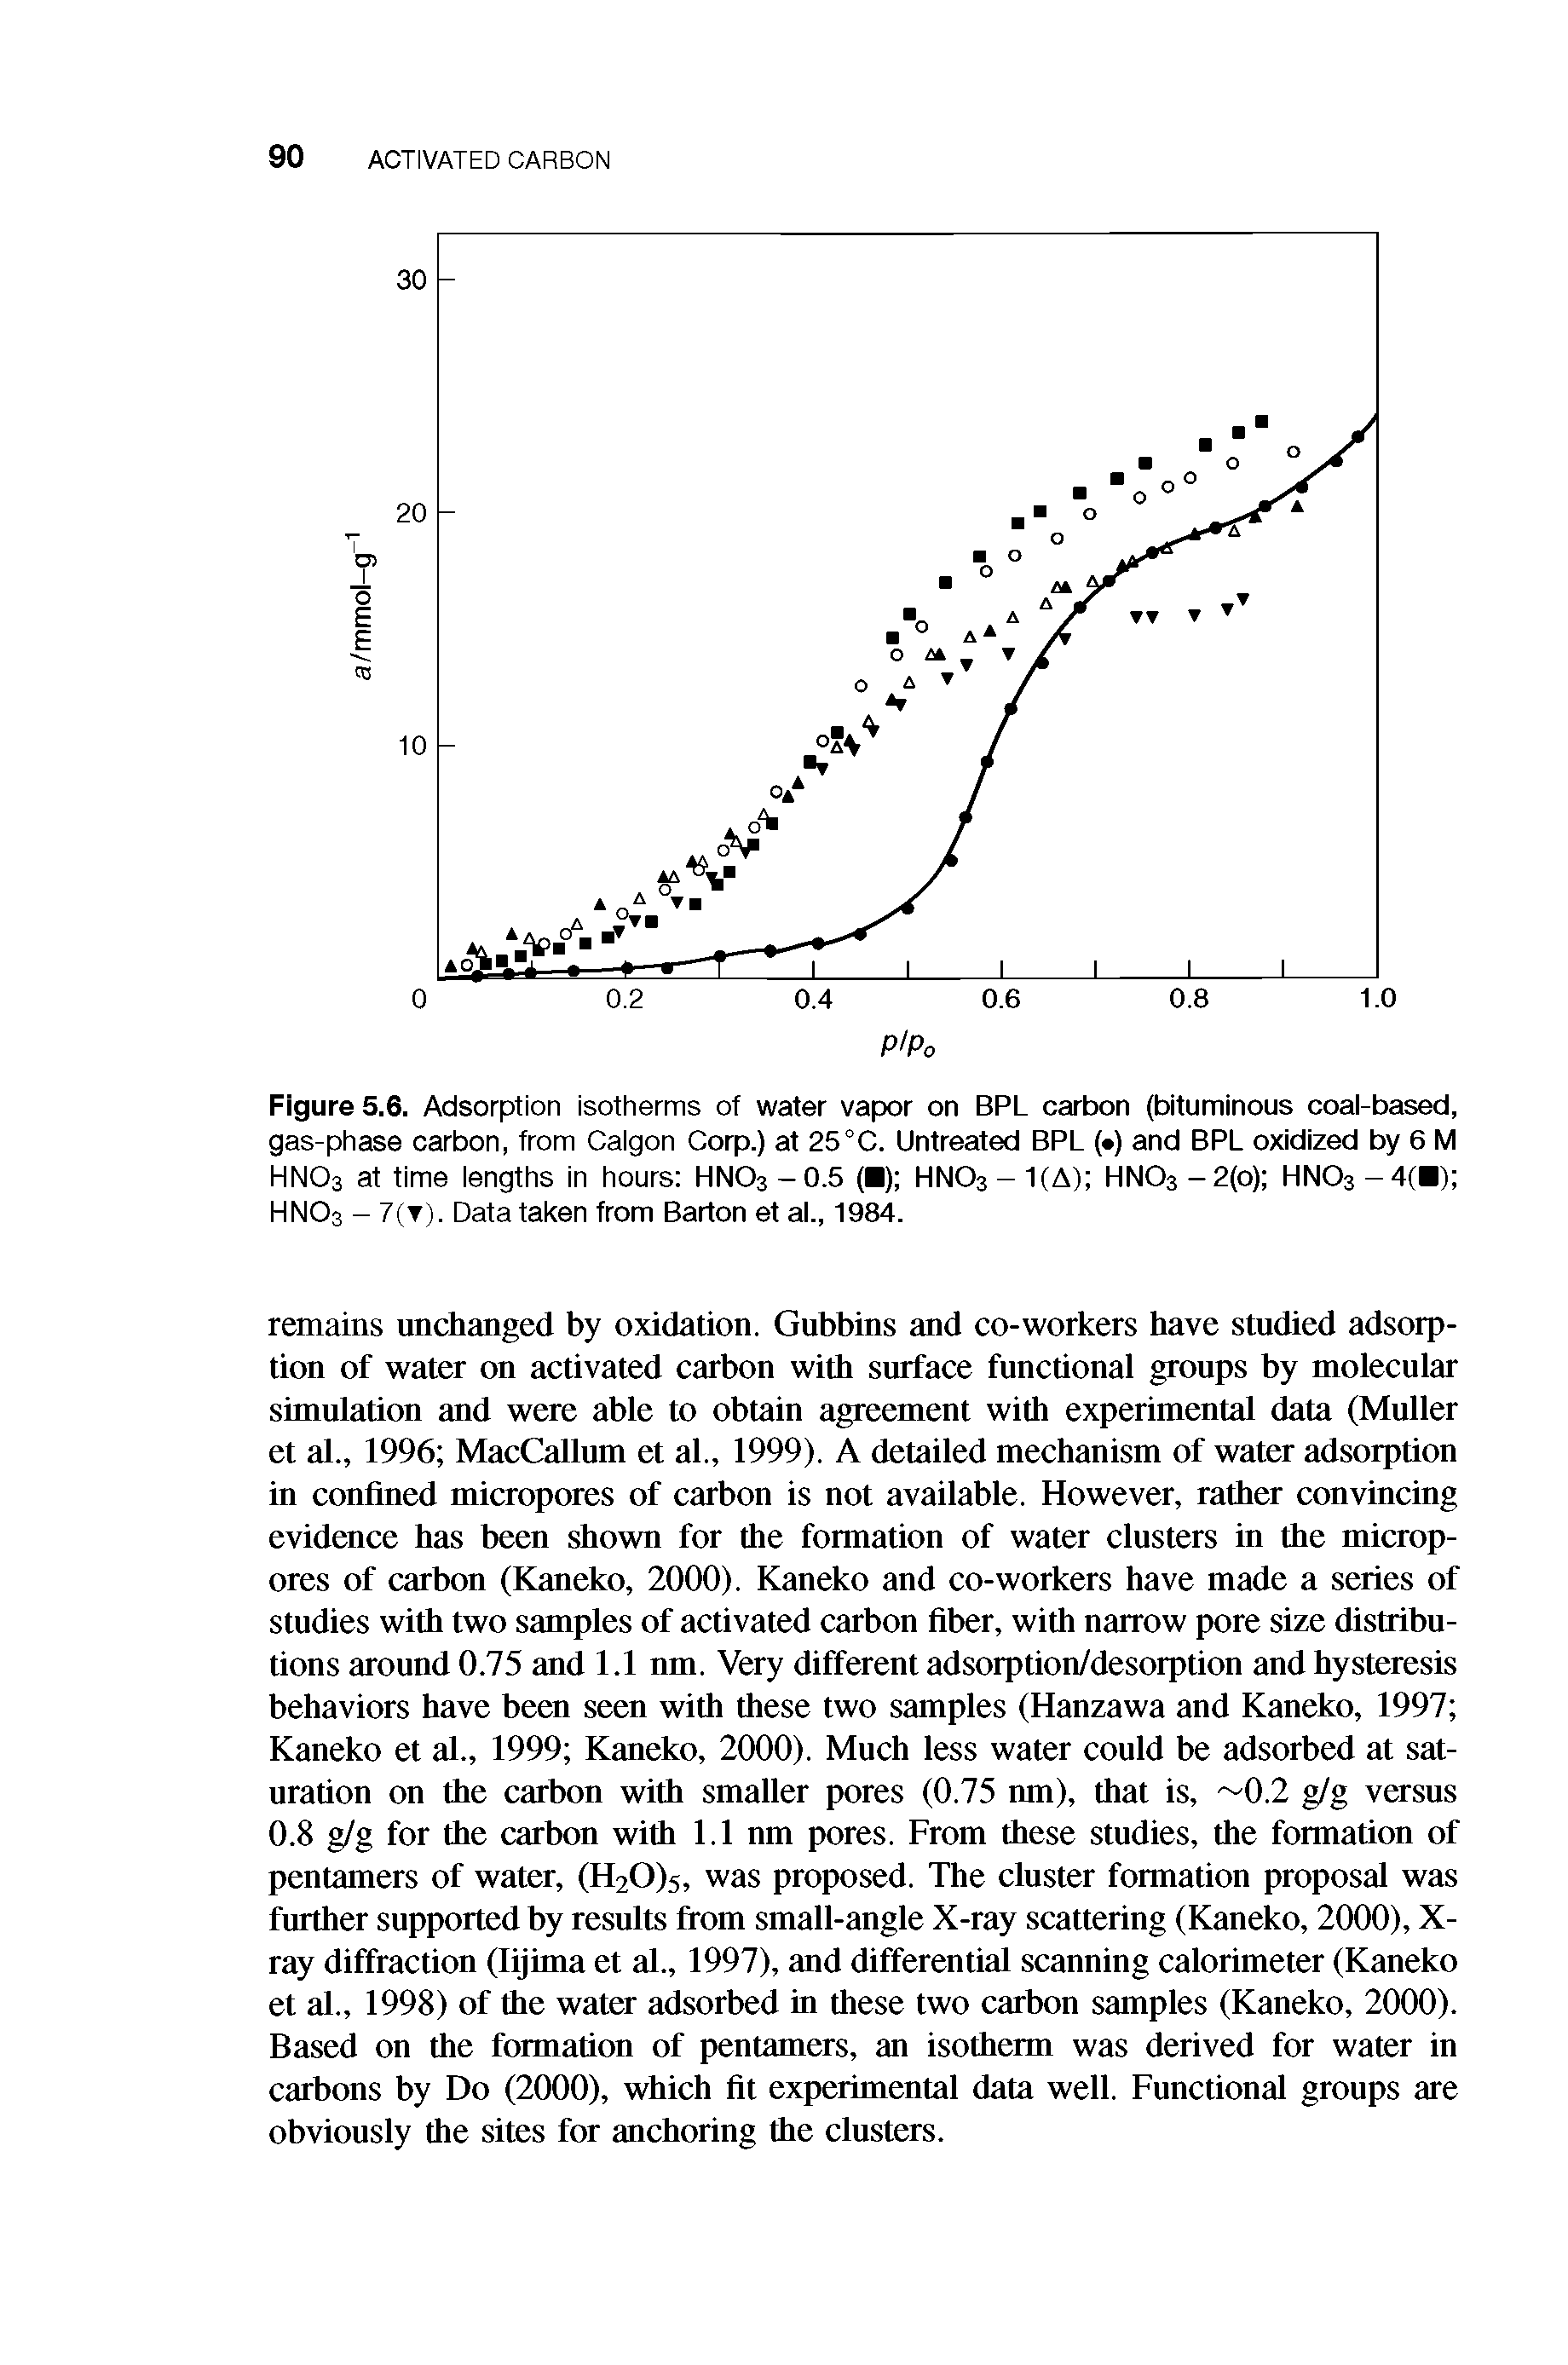 Figure 5.6. Adsorption isotherms of water vapor on BPL carbon (bituminous coai-based, gas-phase carbon, from Caigon Corp.) at 25°C. Untreated BPL ( ) and BPL oxidized by 6 M HNO3 at time lengths in hours HNO3-O.5 ( ) HNO3-KA) HN03-2(o) HN03-4(H) HNO3 - 7(T). Data taken from Barton et ai., 1984.